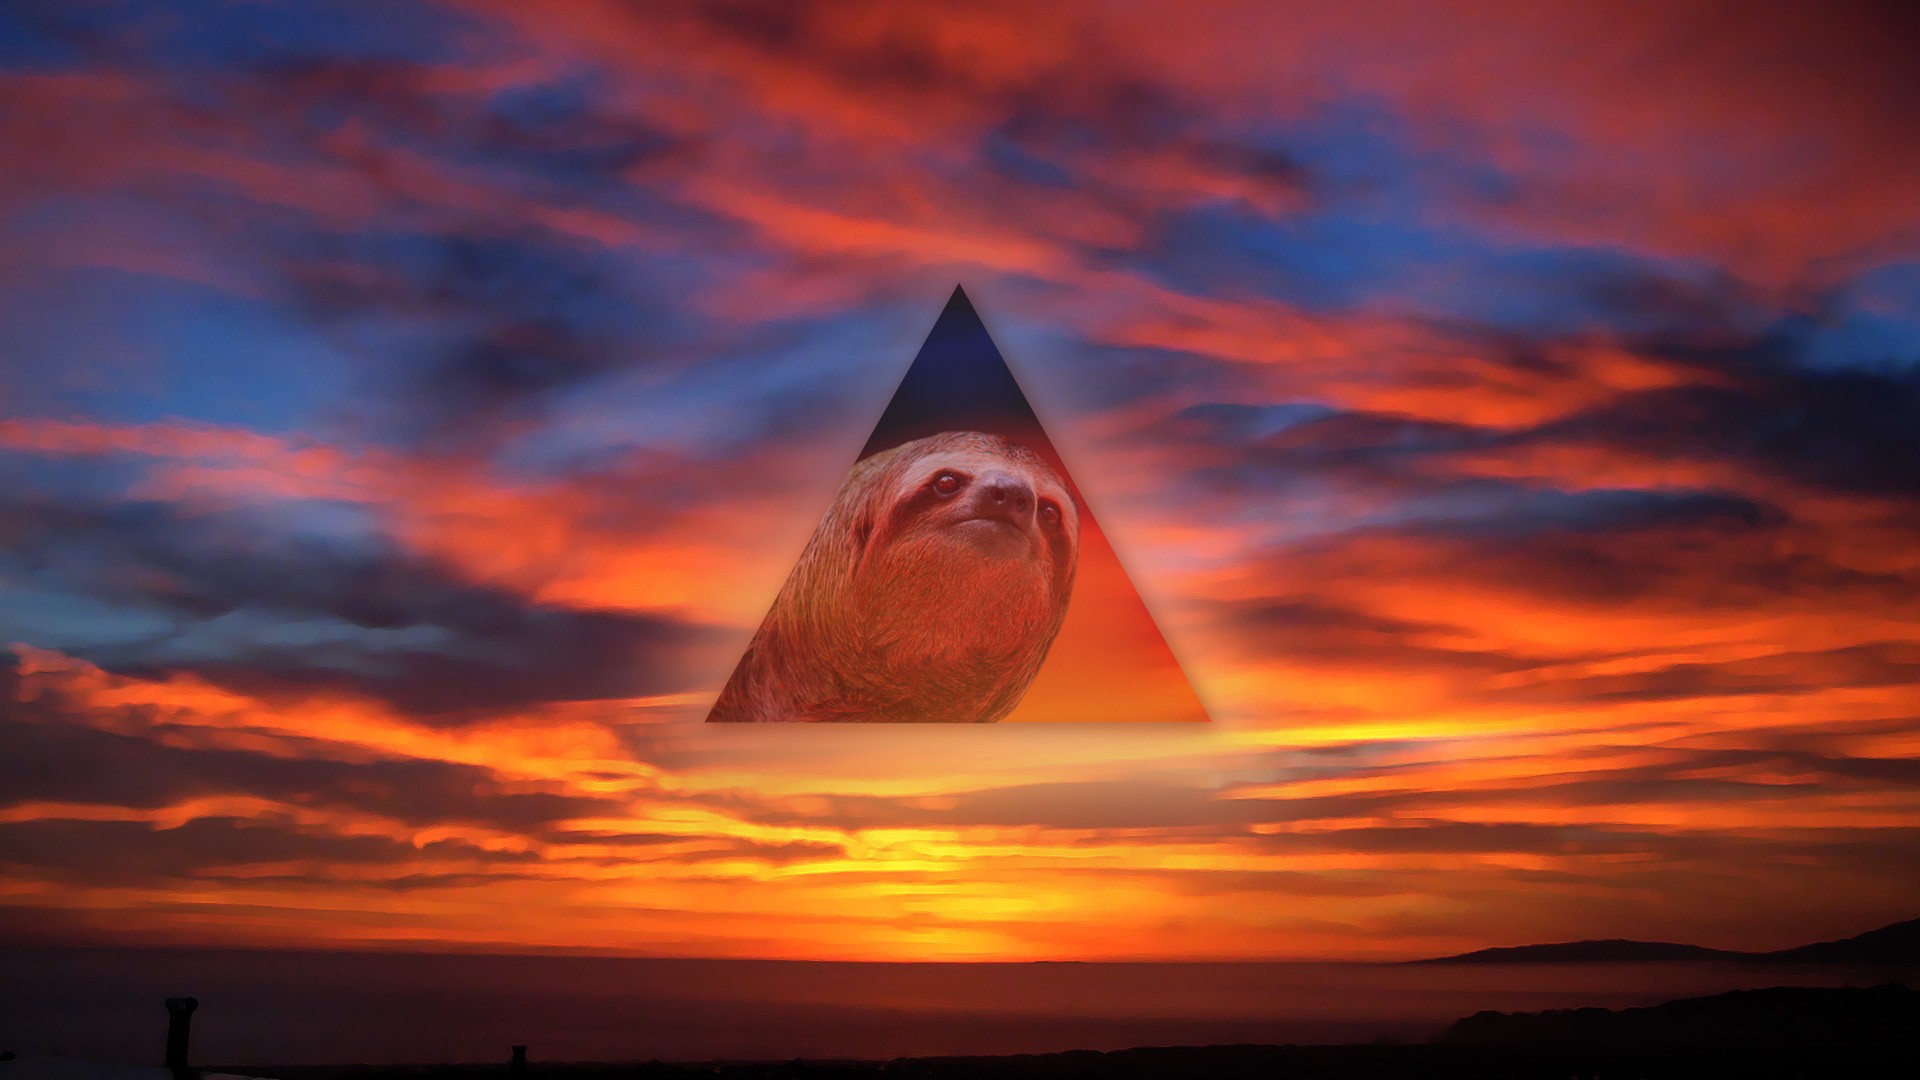 Sloth Image In Sunset - HD Wallpaper 